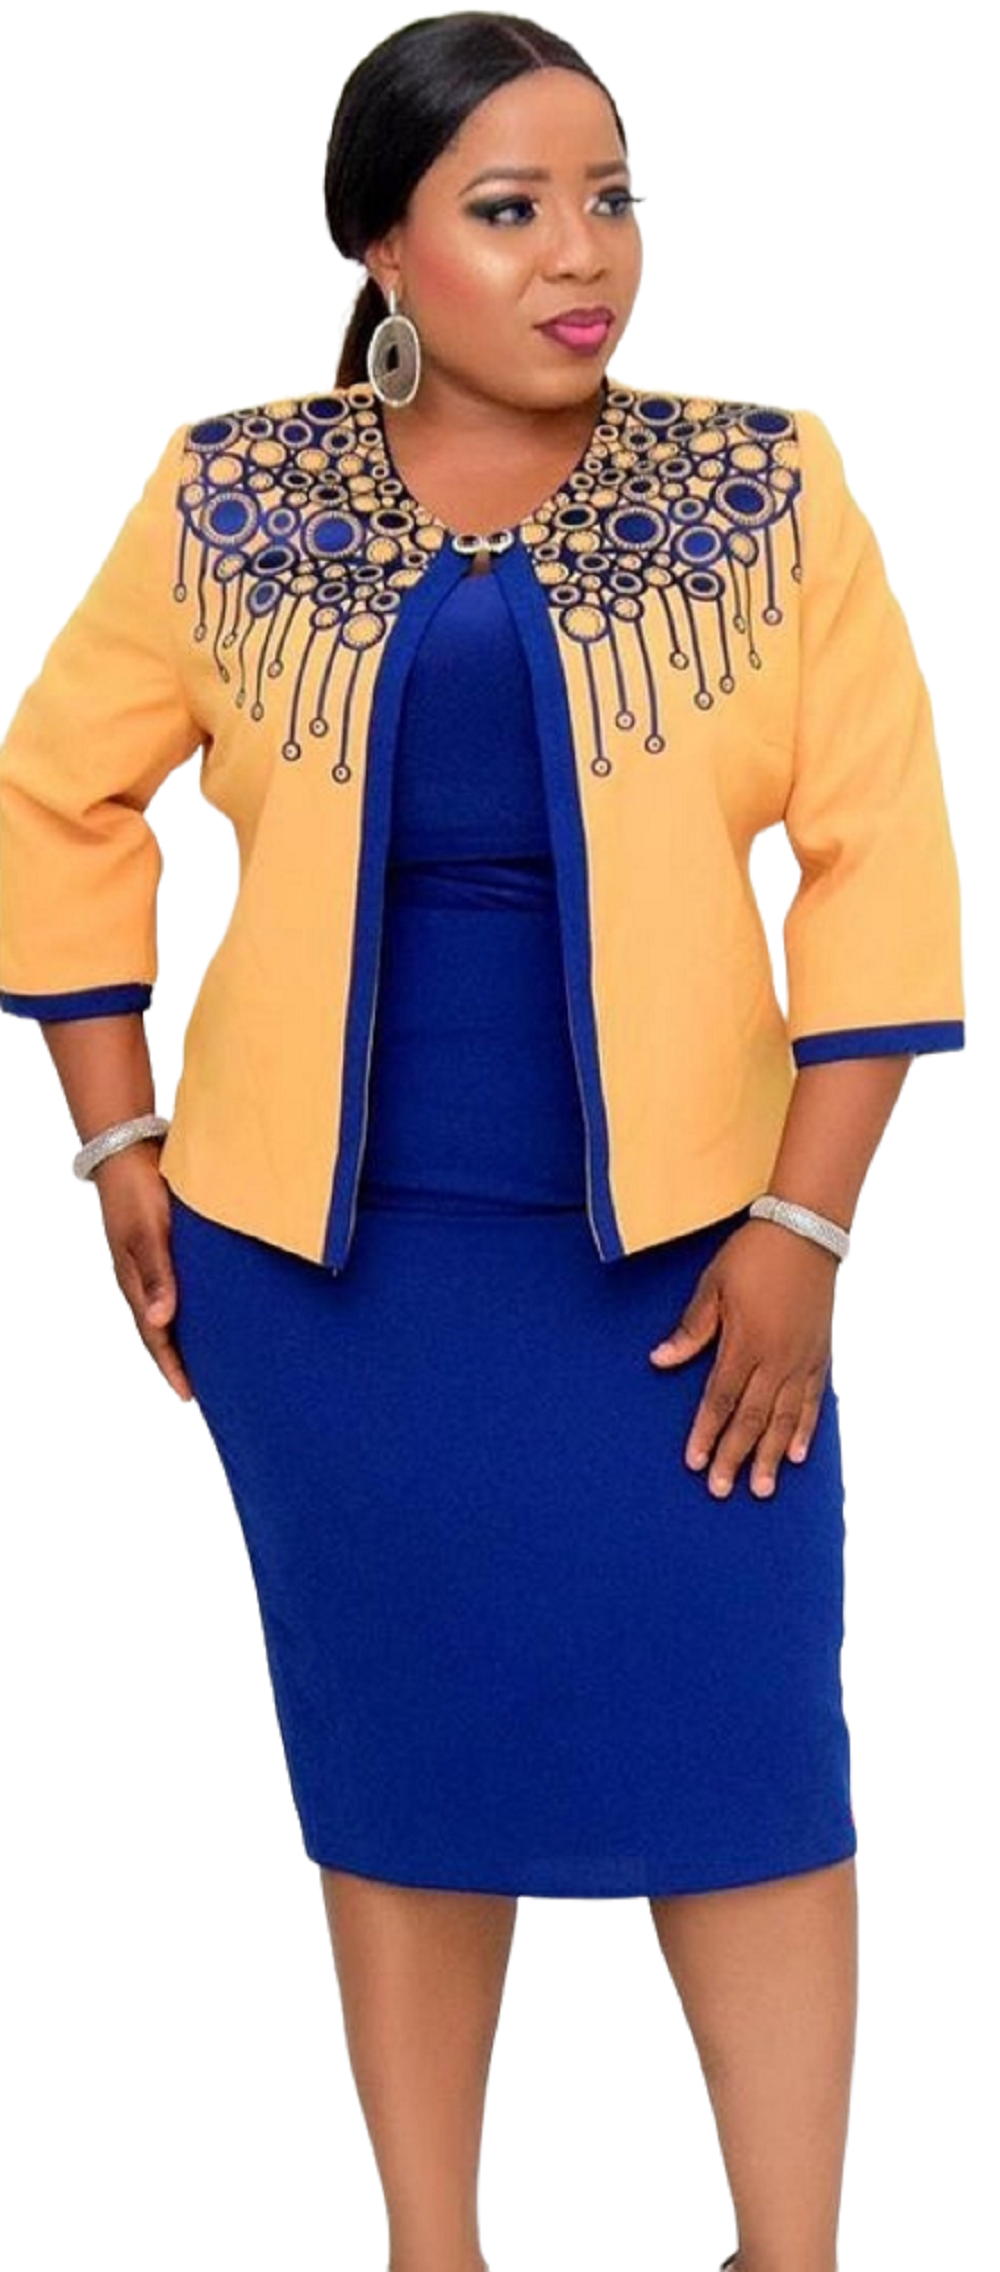 Ladies Women's Yellow & Blue Mother Of The Bride Party Dress & Jacket 2Piece Set